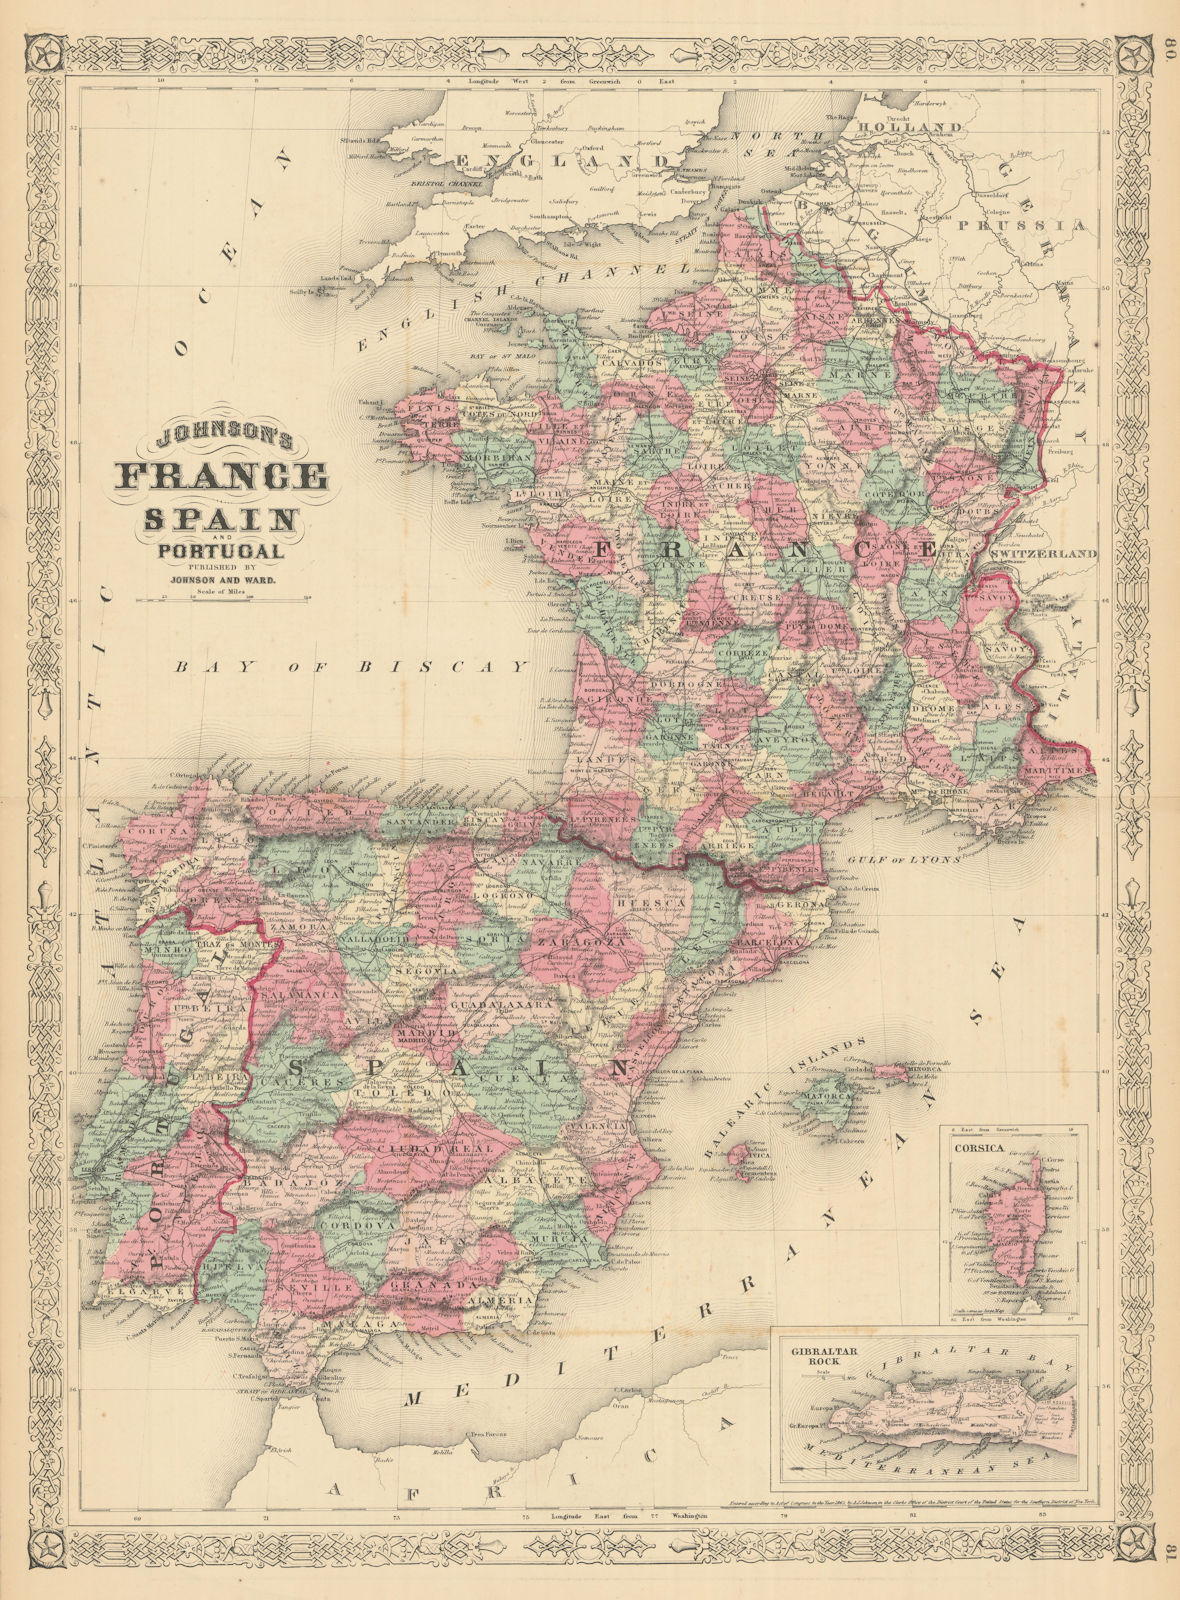 Johnson's France, Spain and Portugal. Corsica Gibraltar Iberia 1866 old map